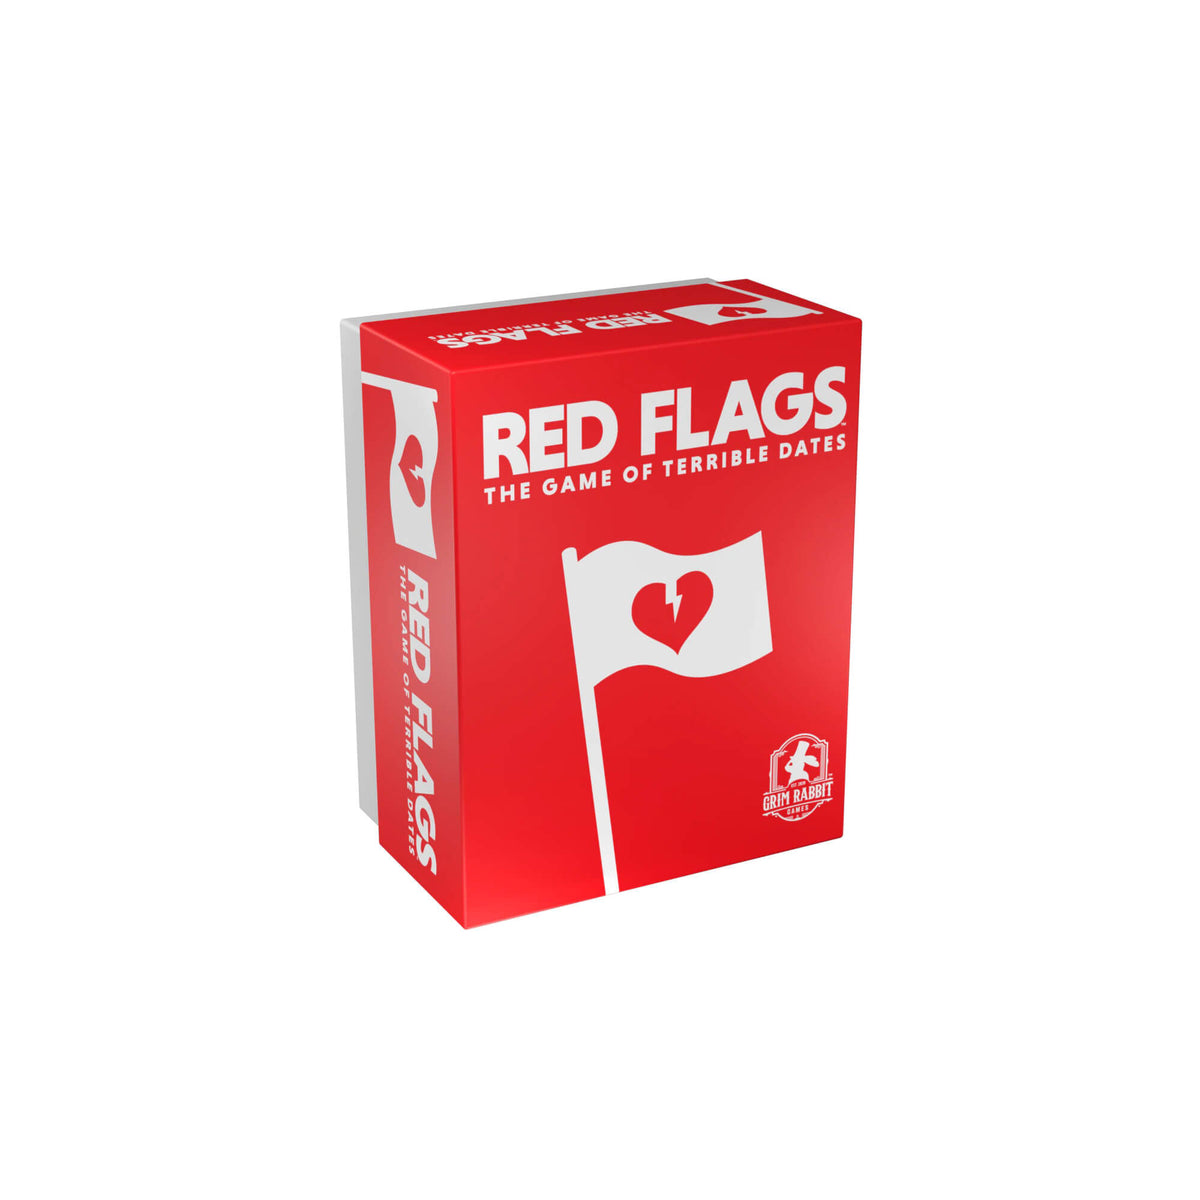 Red Flags Party Card Game  The game of terrible dates – Grim Rabbit Games